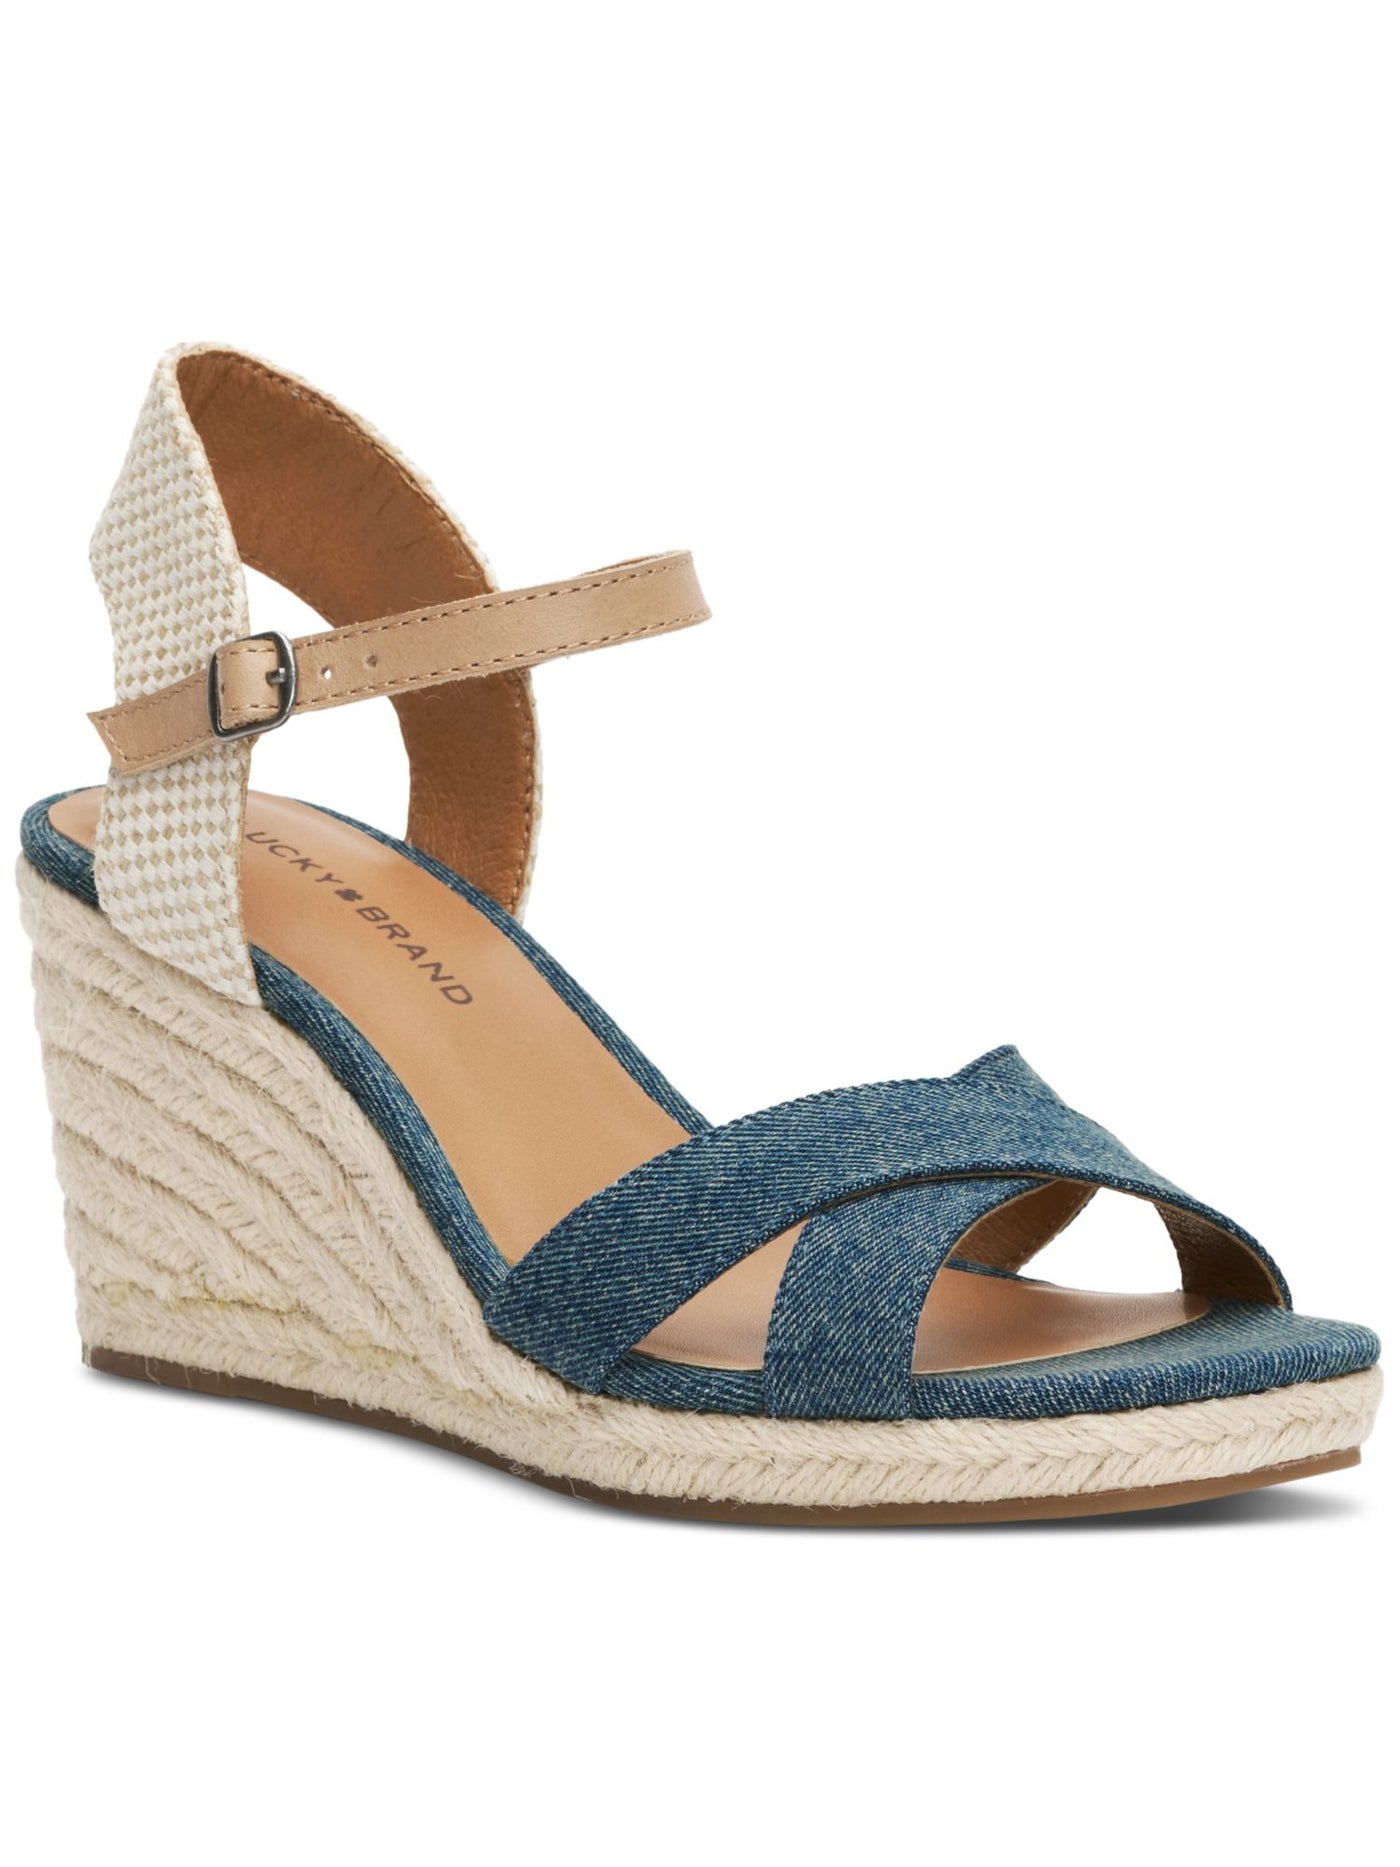 LUCKY BRAND Womens Blue Mixed Media Crisscross Straps Slingback Ankle Strap Padded Maeylee Open Toe Wedge Buckle Espadrille Shoes 11 M